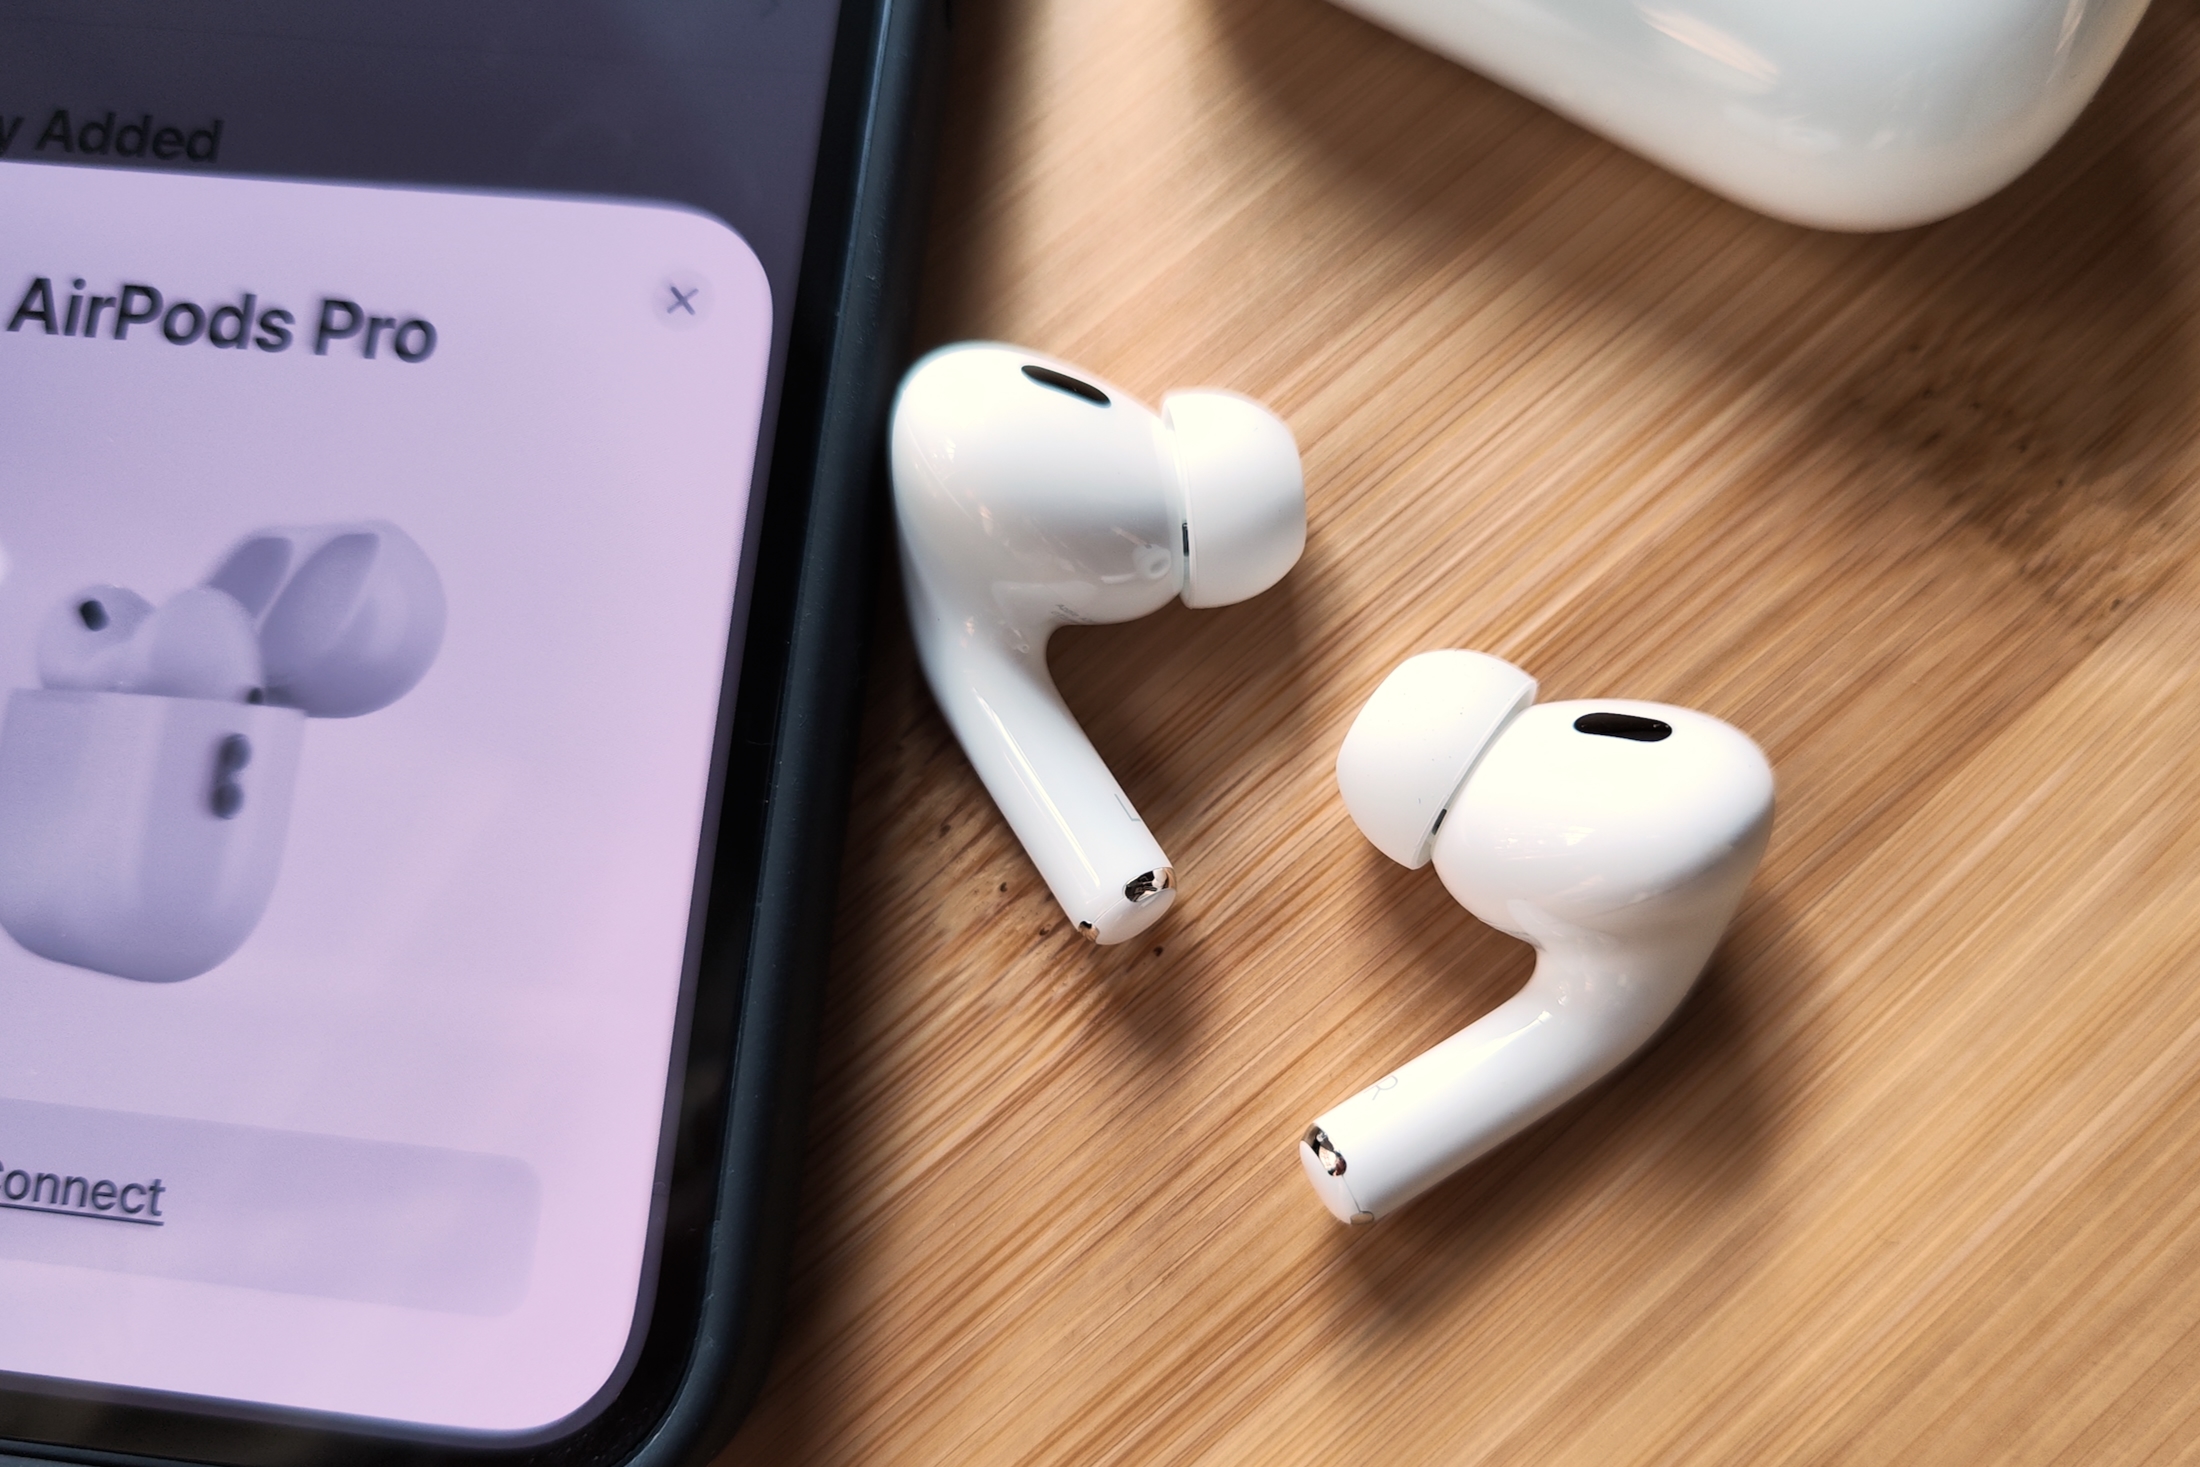 Apple has released a new firmware version for AirPods, AirPods Pro and AirPods Max